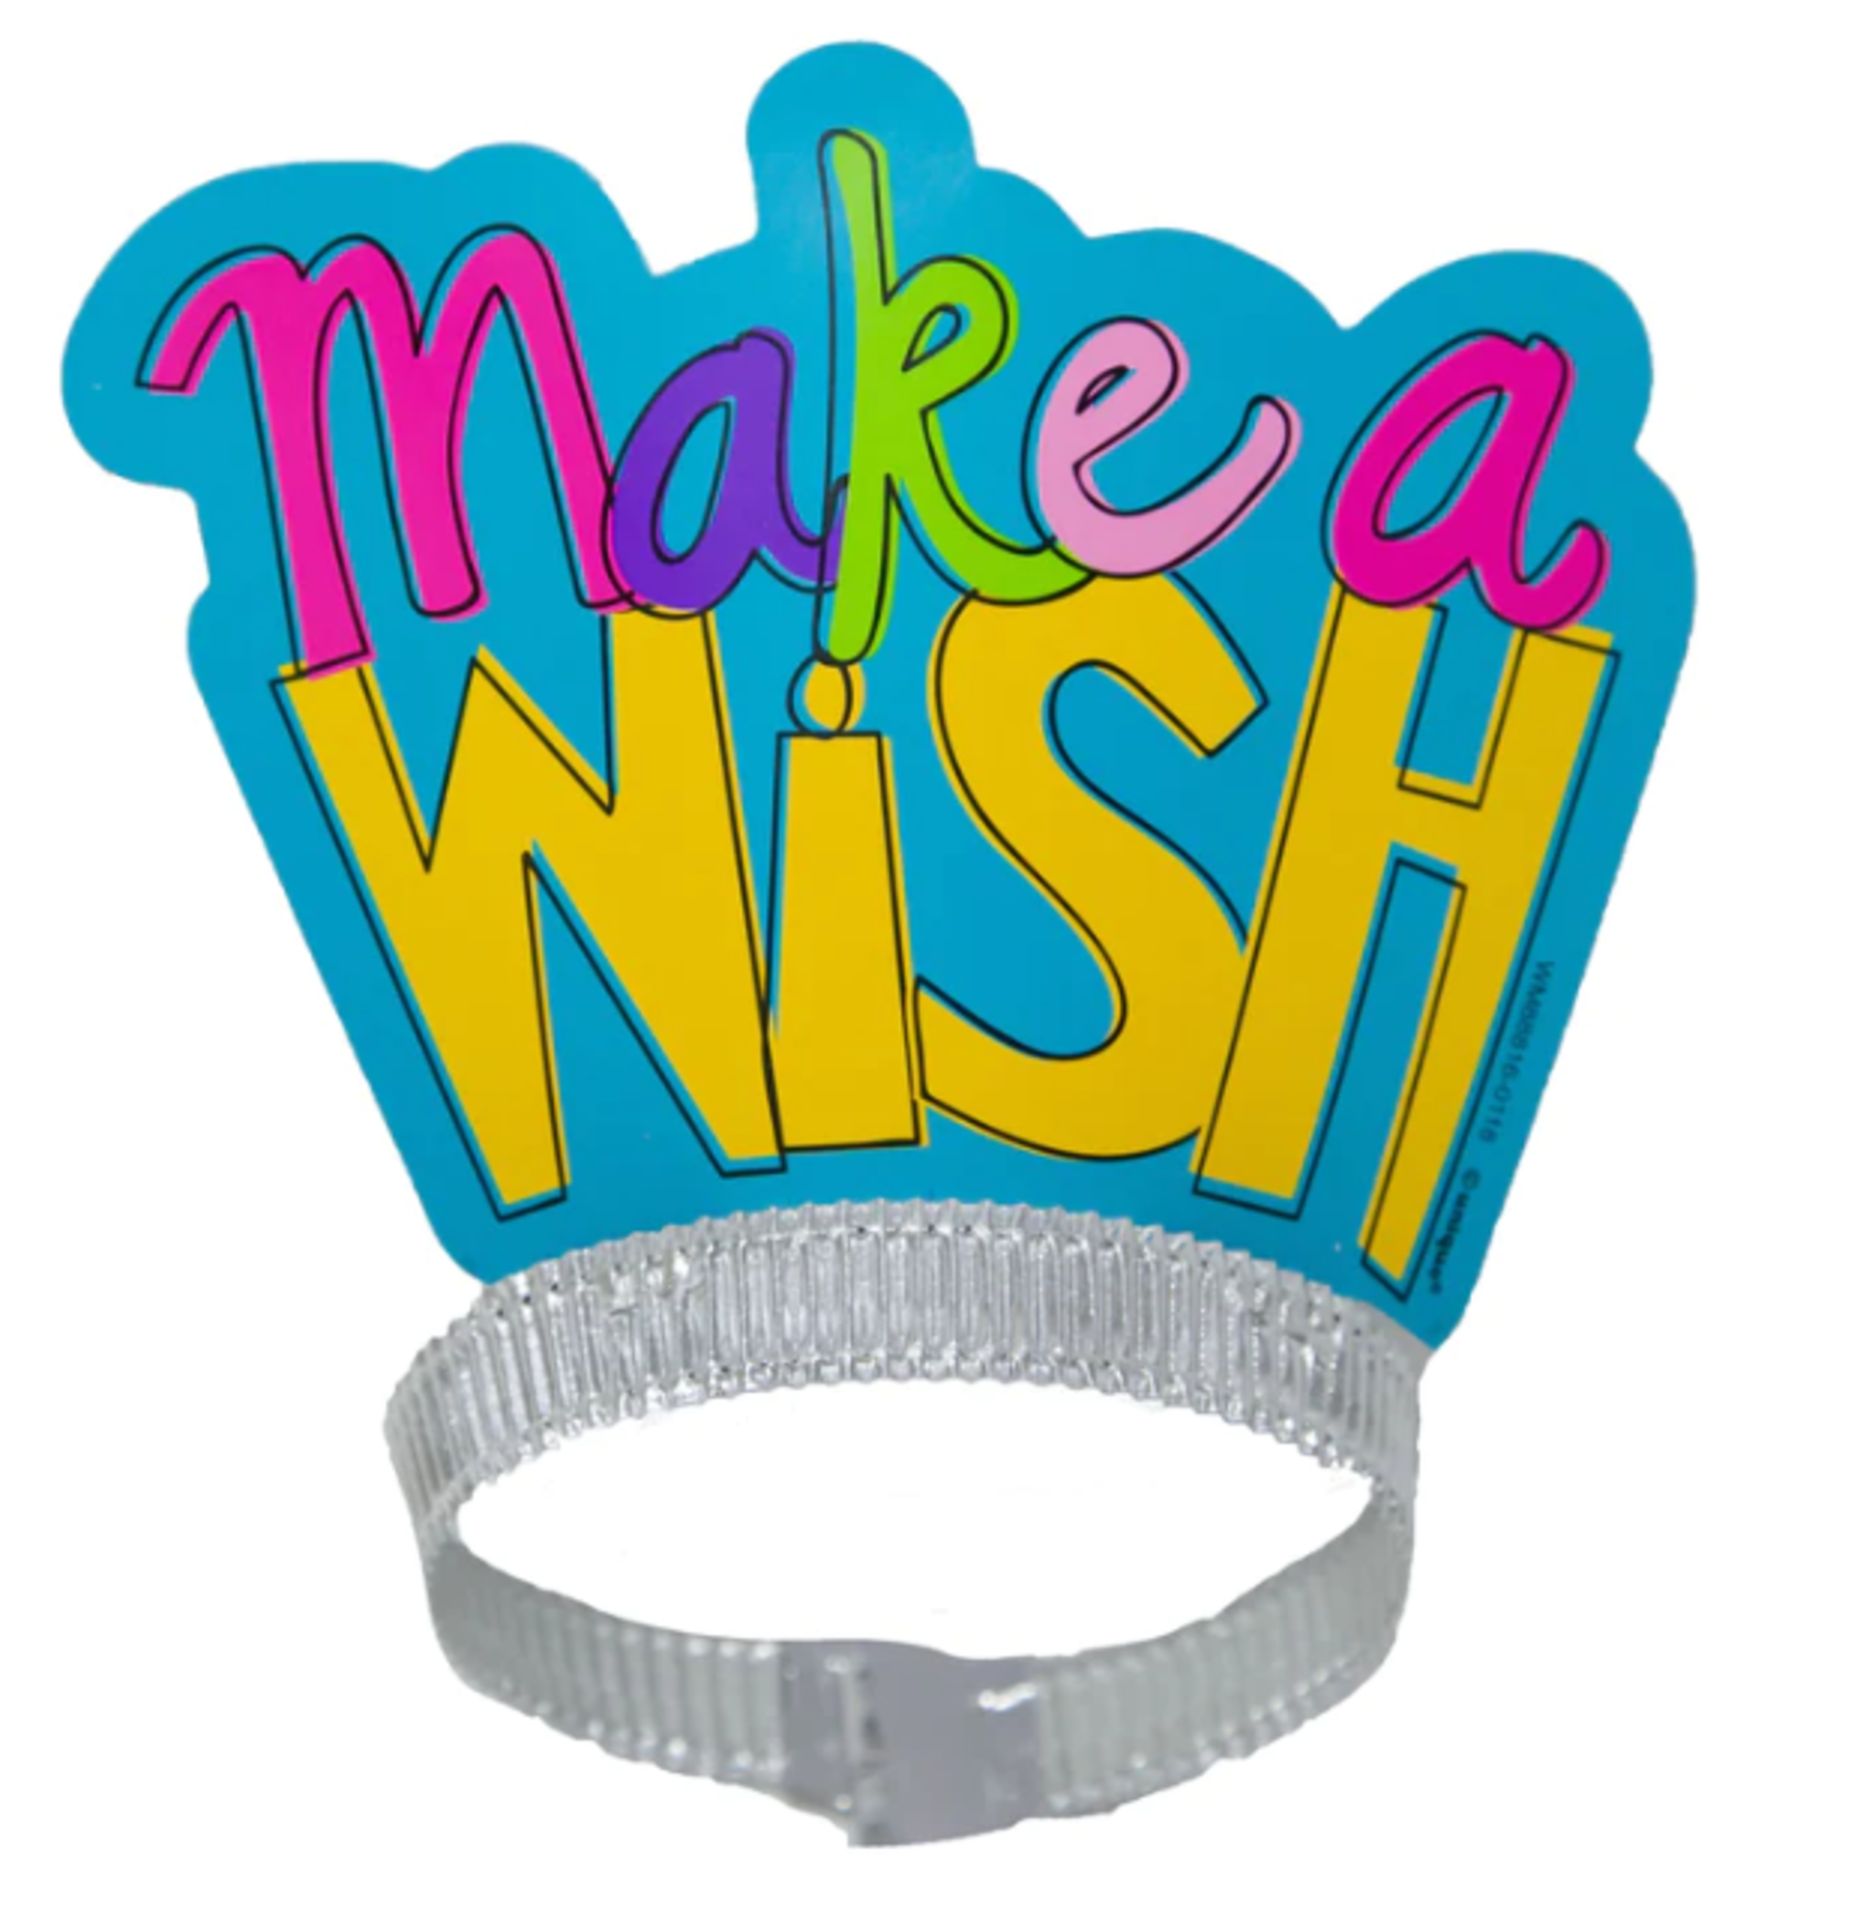 2500 PARTY SUPPLIES MAKE A WISH TIARA'S - PACK OF 4 RRP £25,000